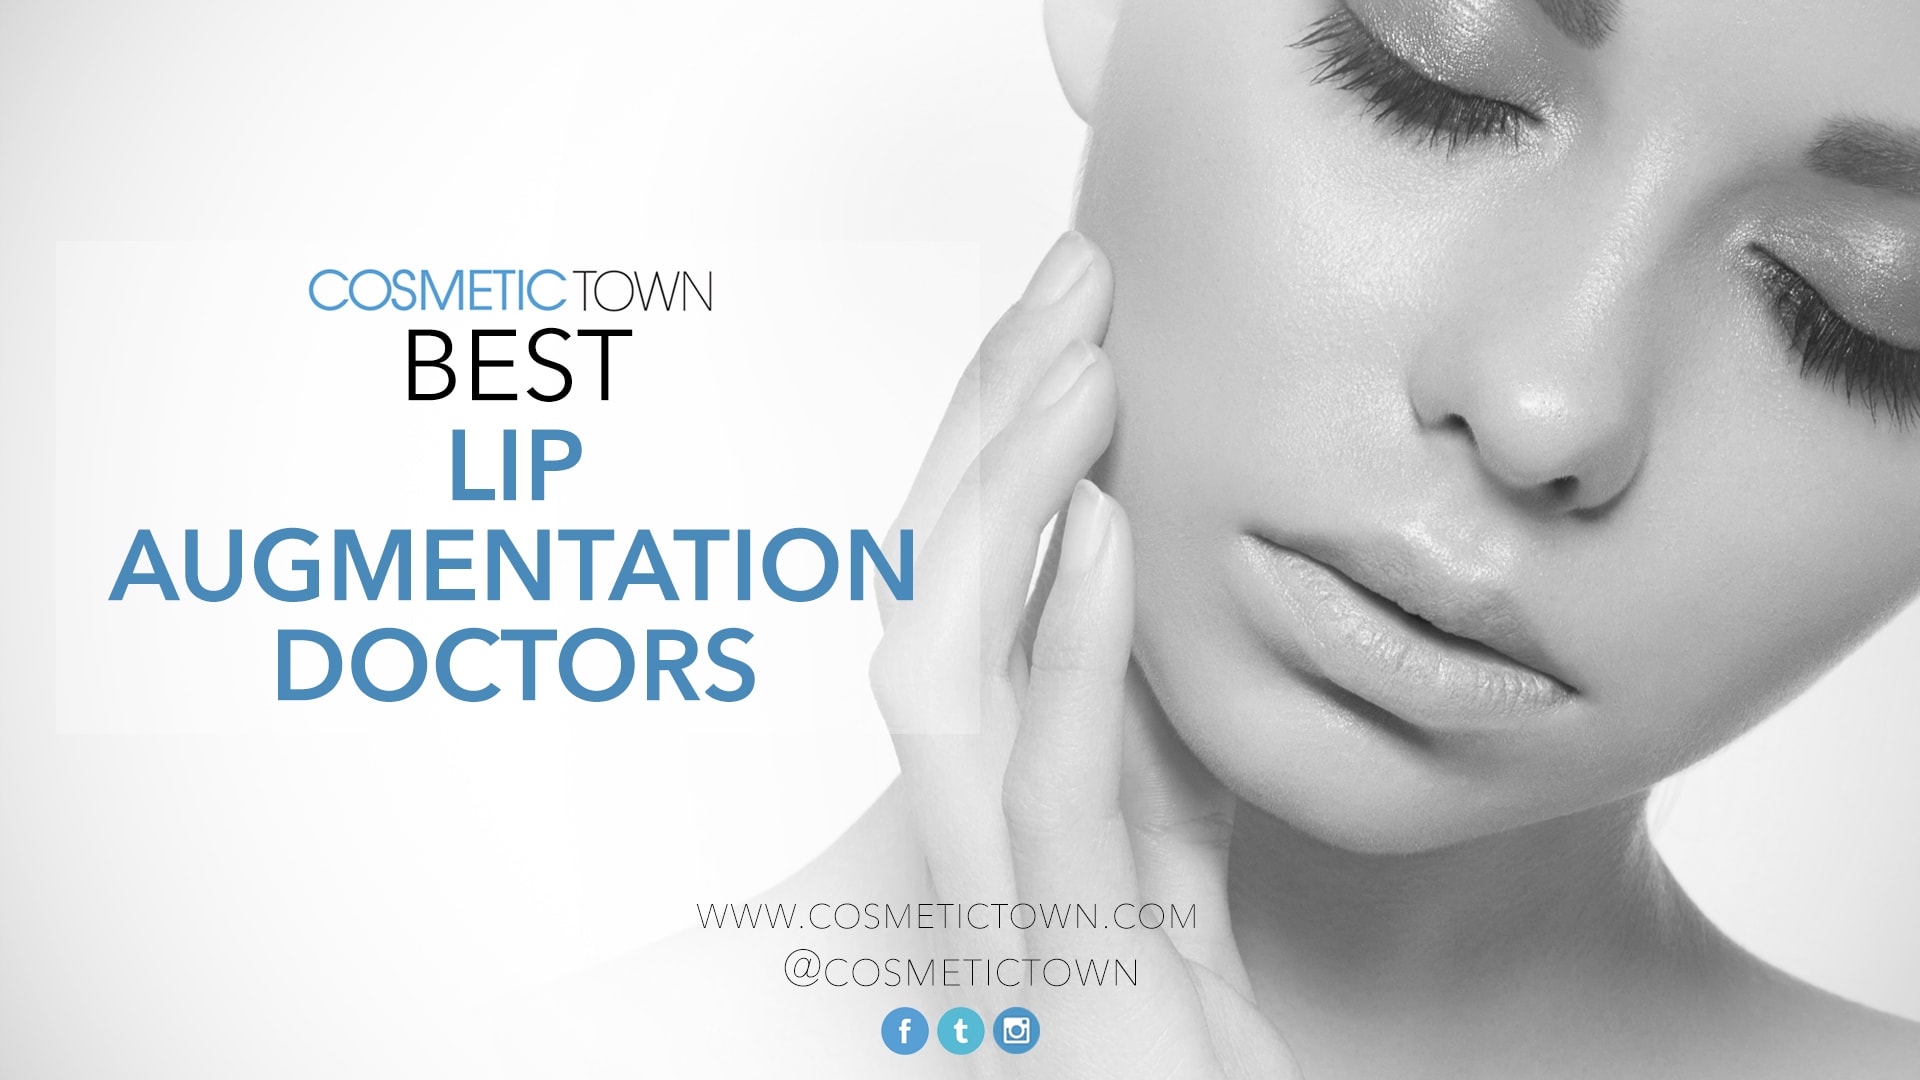 Discover the Best Lip Augmentation Doctors in San Francisco